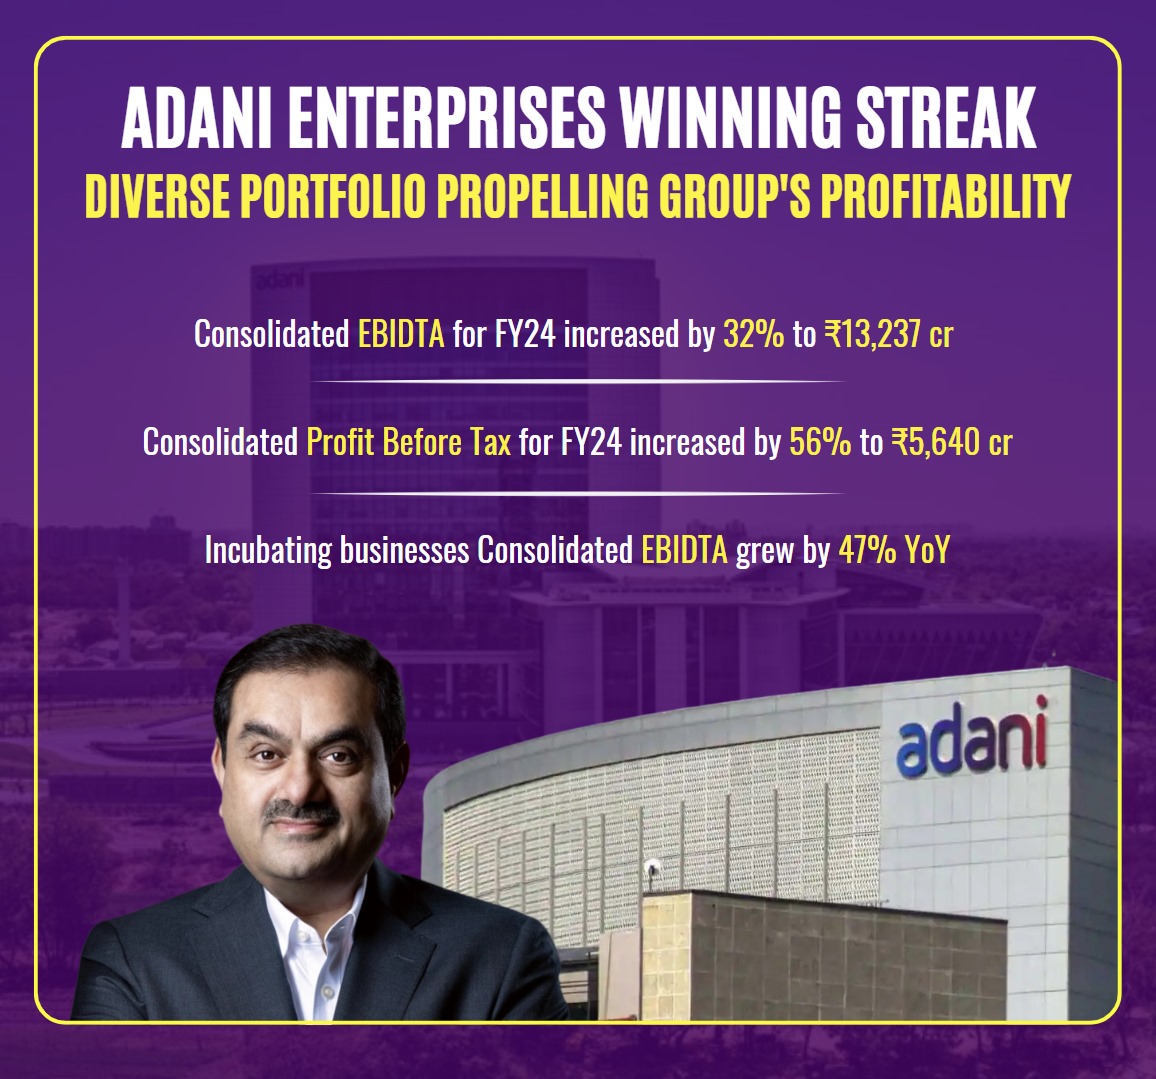 Investors of #AdaniEnterprises have ample reason to be excited, with EBITDA surging to ₹13,237 Cr and profits reaching ₹5,640 Cr. These promising results underscore the company's strong performance and potential for growth. #ProfitKingAdani